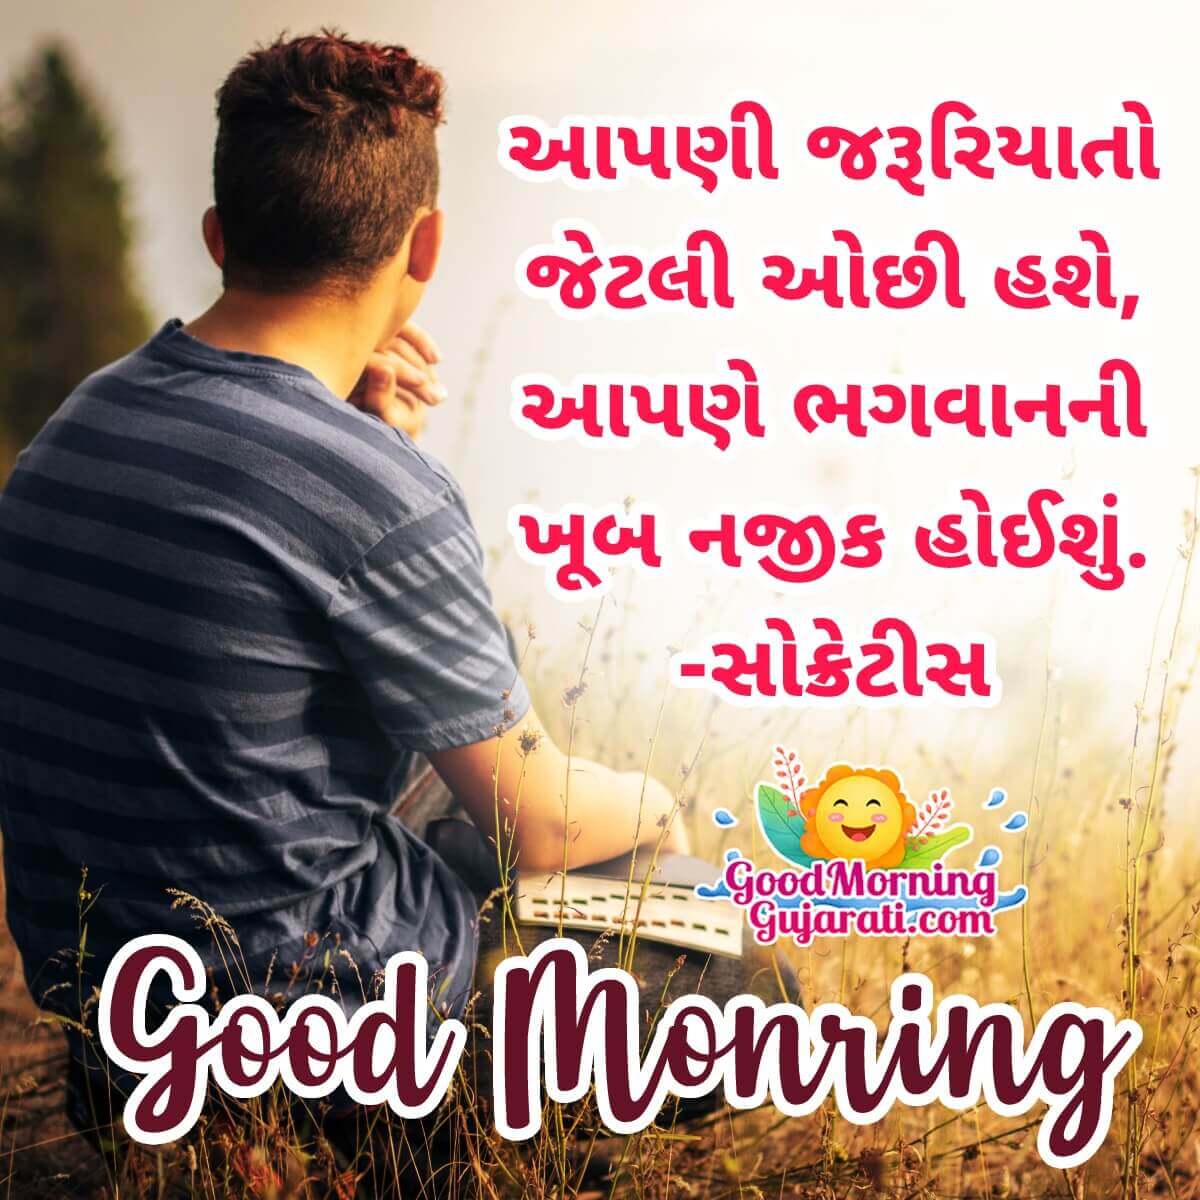 Good Morning Amazing Quotes in Gujarati - Good Morning Wishes & Images